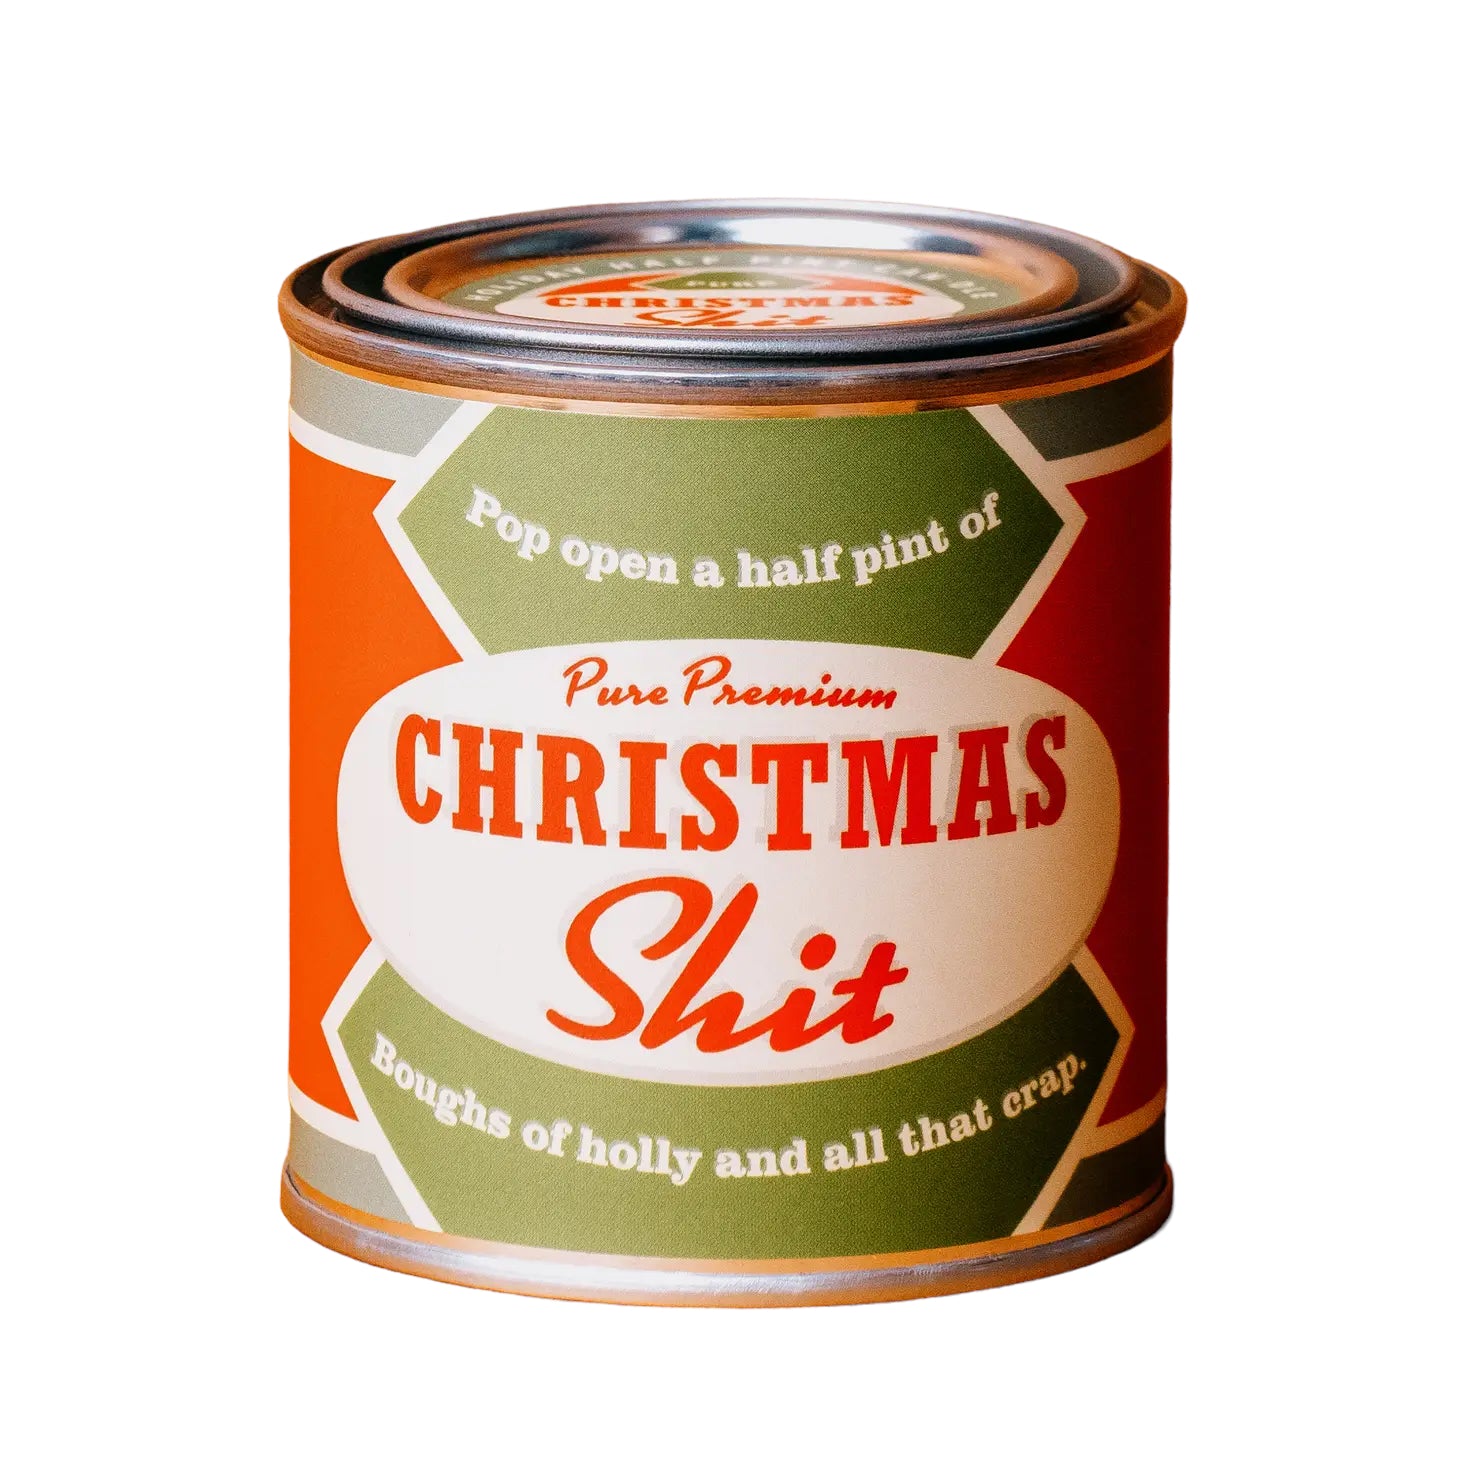 "CHRISTMAS SHIT" HALF-PINT PAINT CAN CANDLE